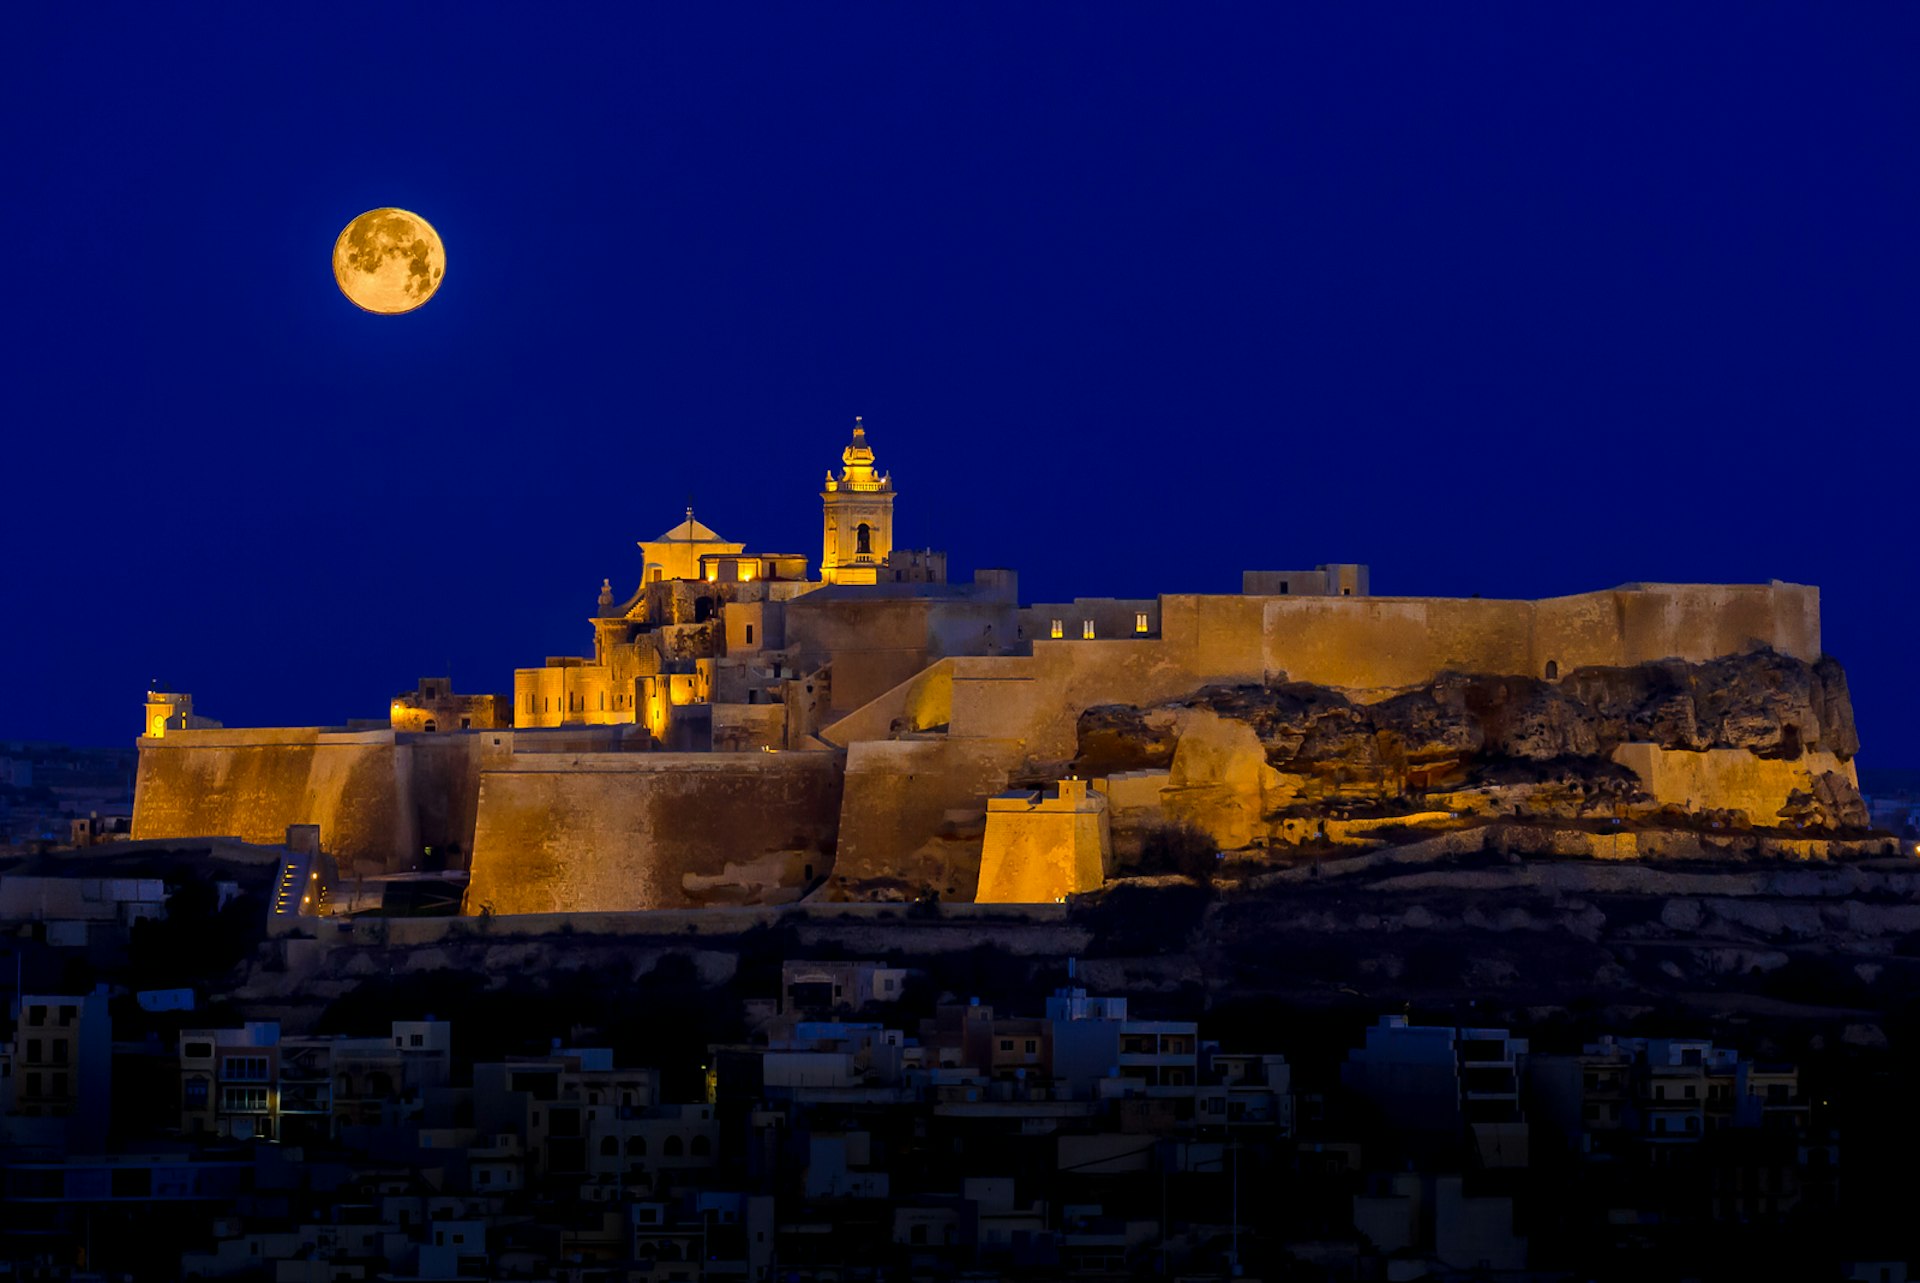 With a full moon rising into a dark sky, the Ċittadella glows gold in floodlights © rossmagri / Getty Images